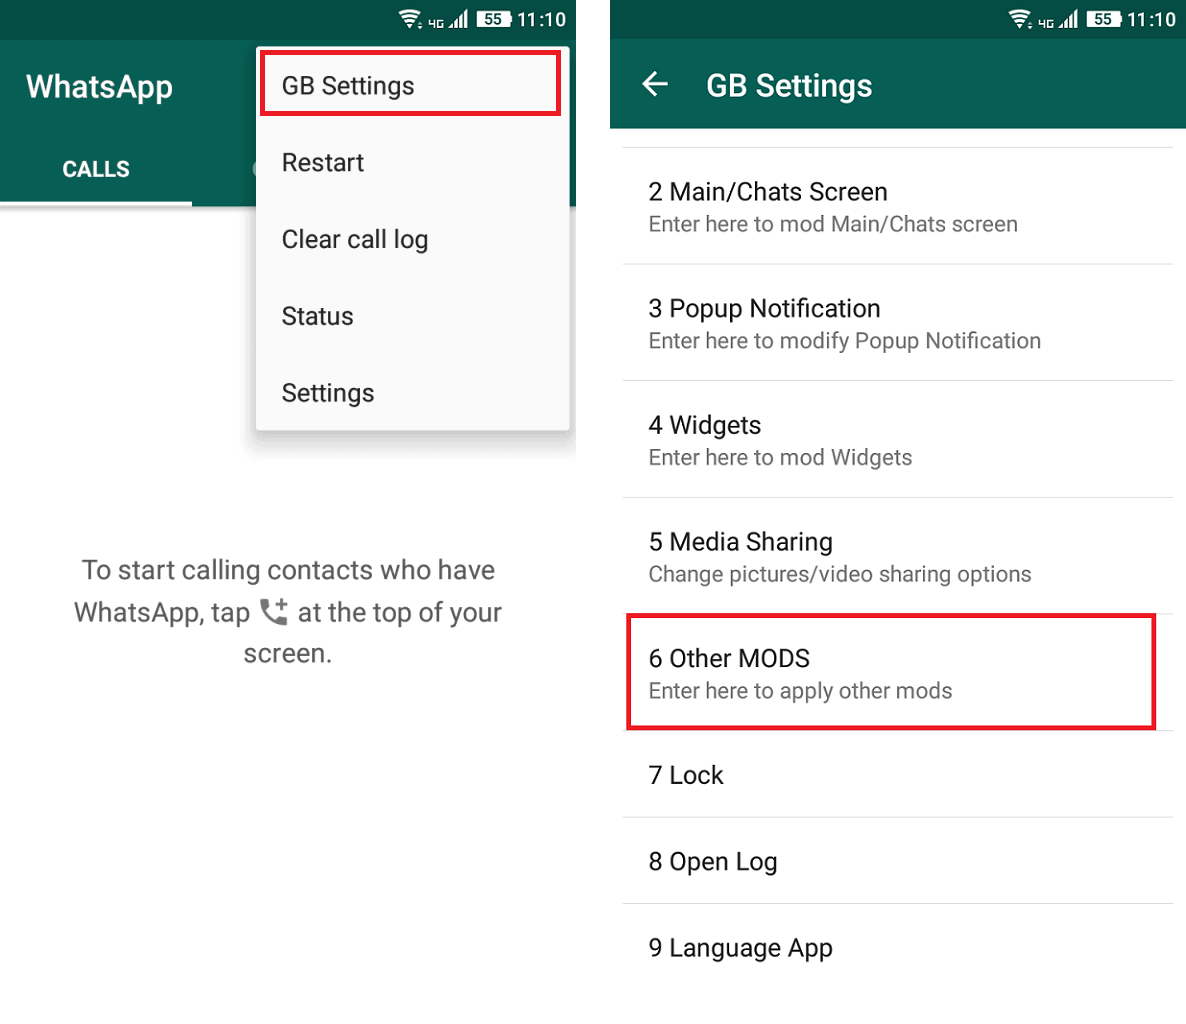 Tap on GB Settings then choose the ‘Other MODS’ option